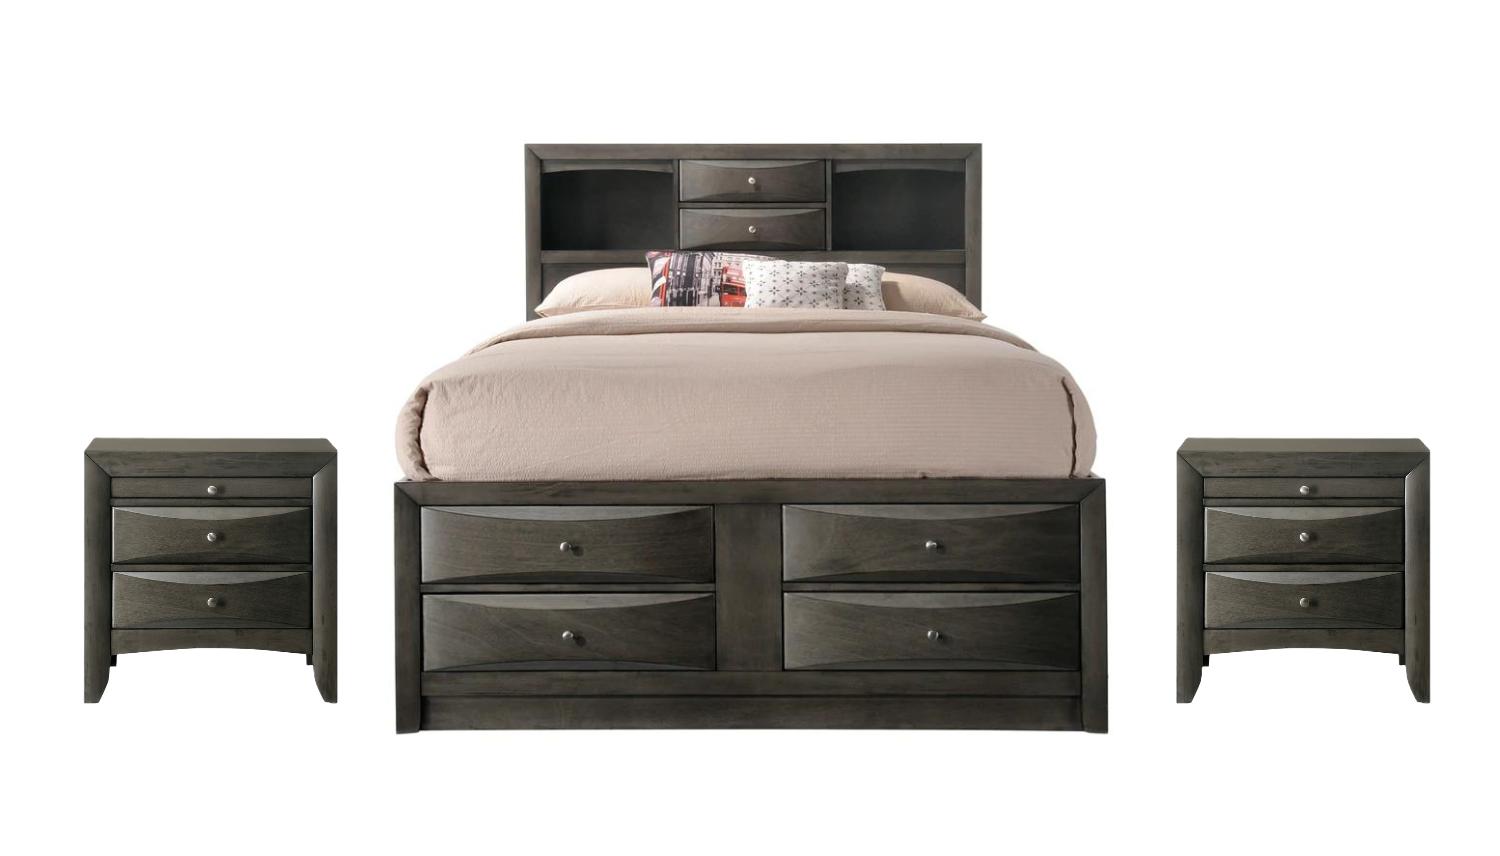 Contemporary, Transitional Storage Bedroom Set Emily B4275-Q-Bed-3pcs in Gray 